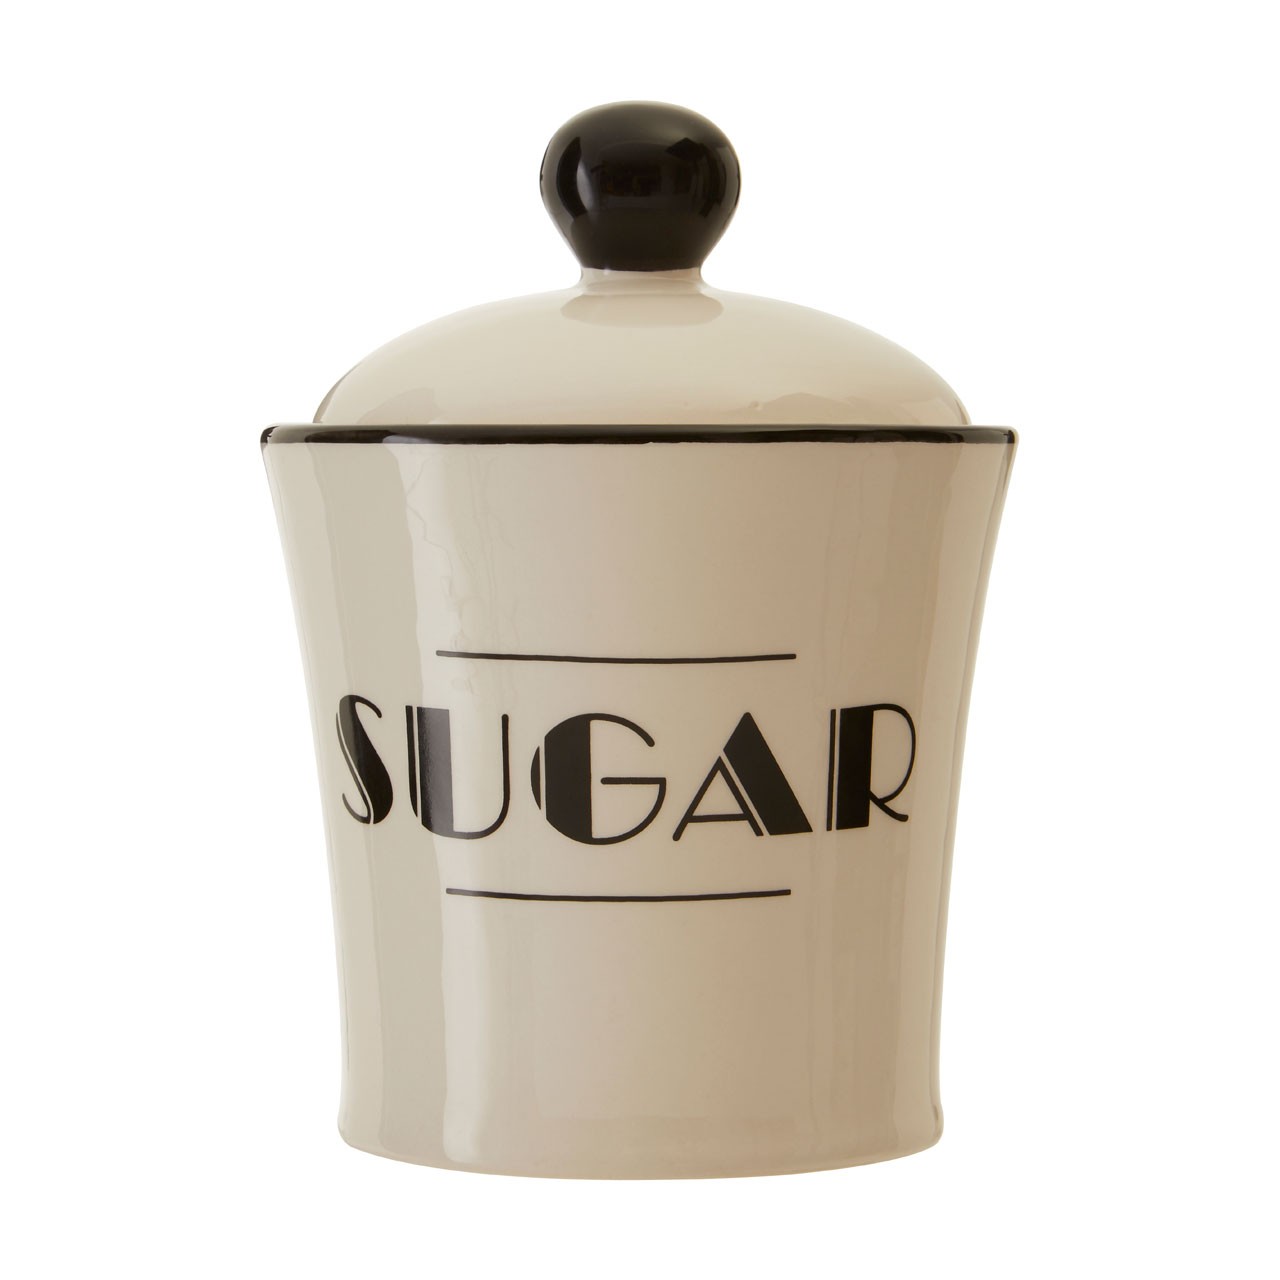 Broadway Sugar Canister For Home Kitchen - Click Image to Close